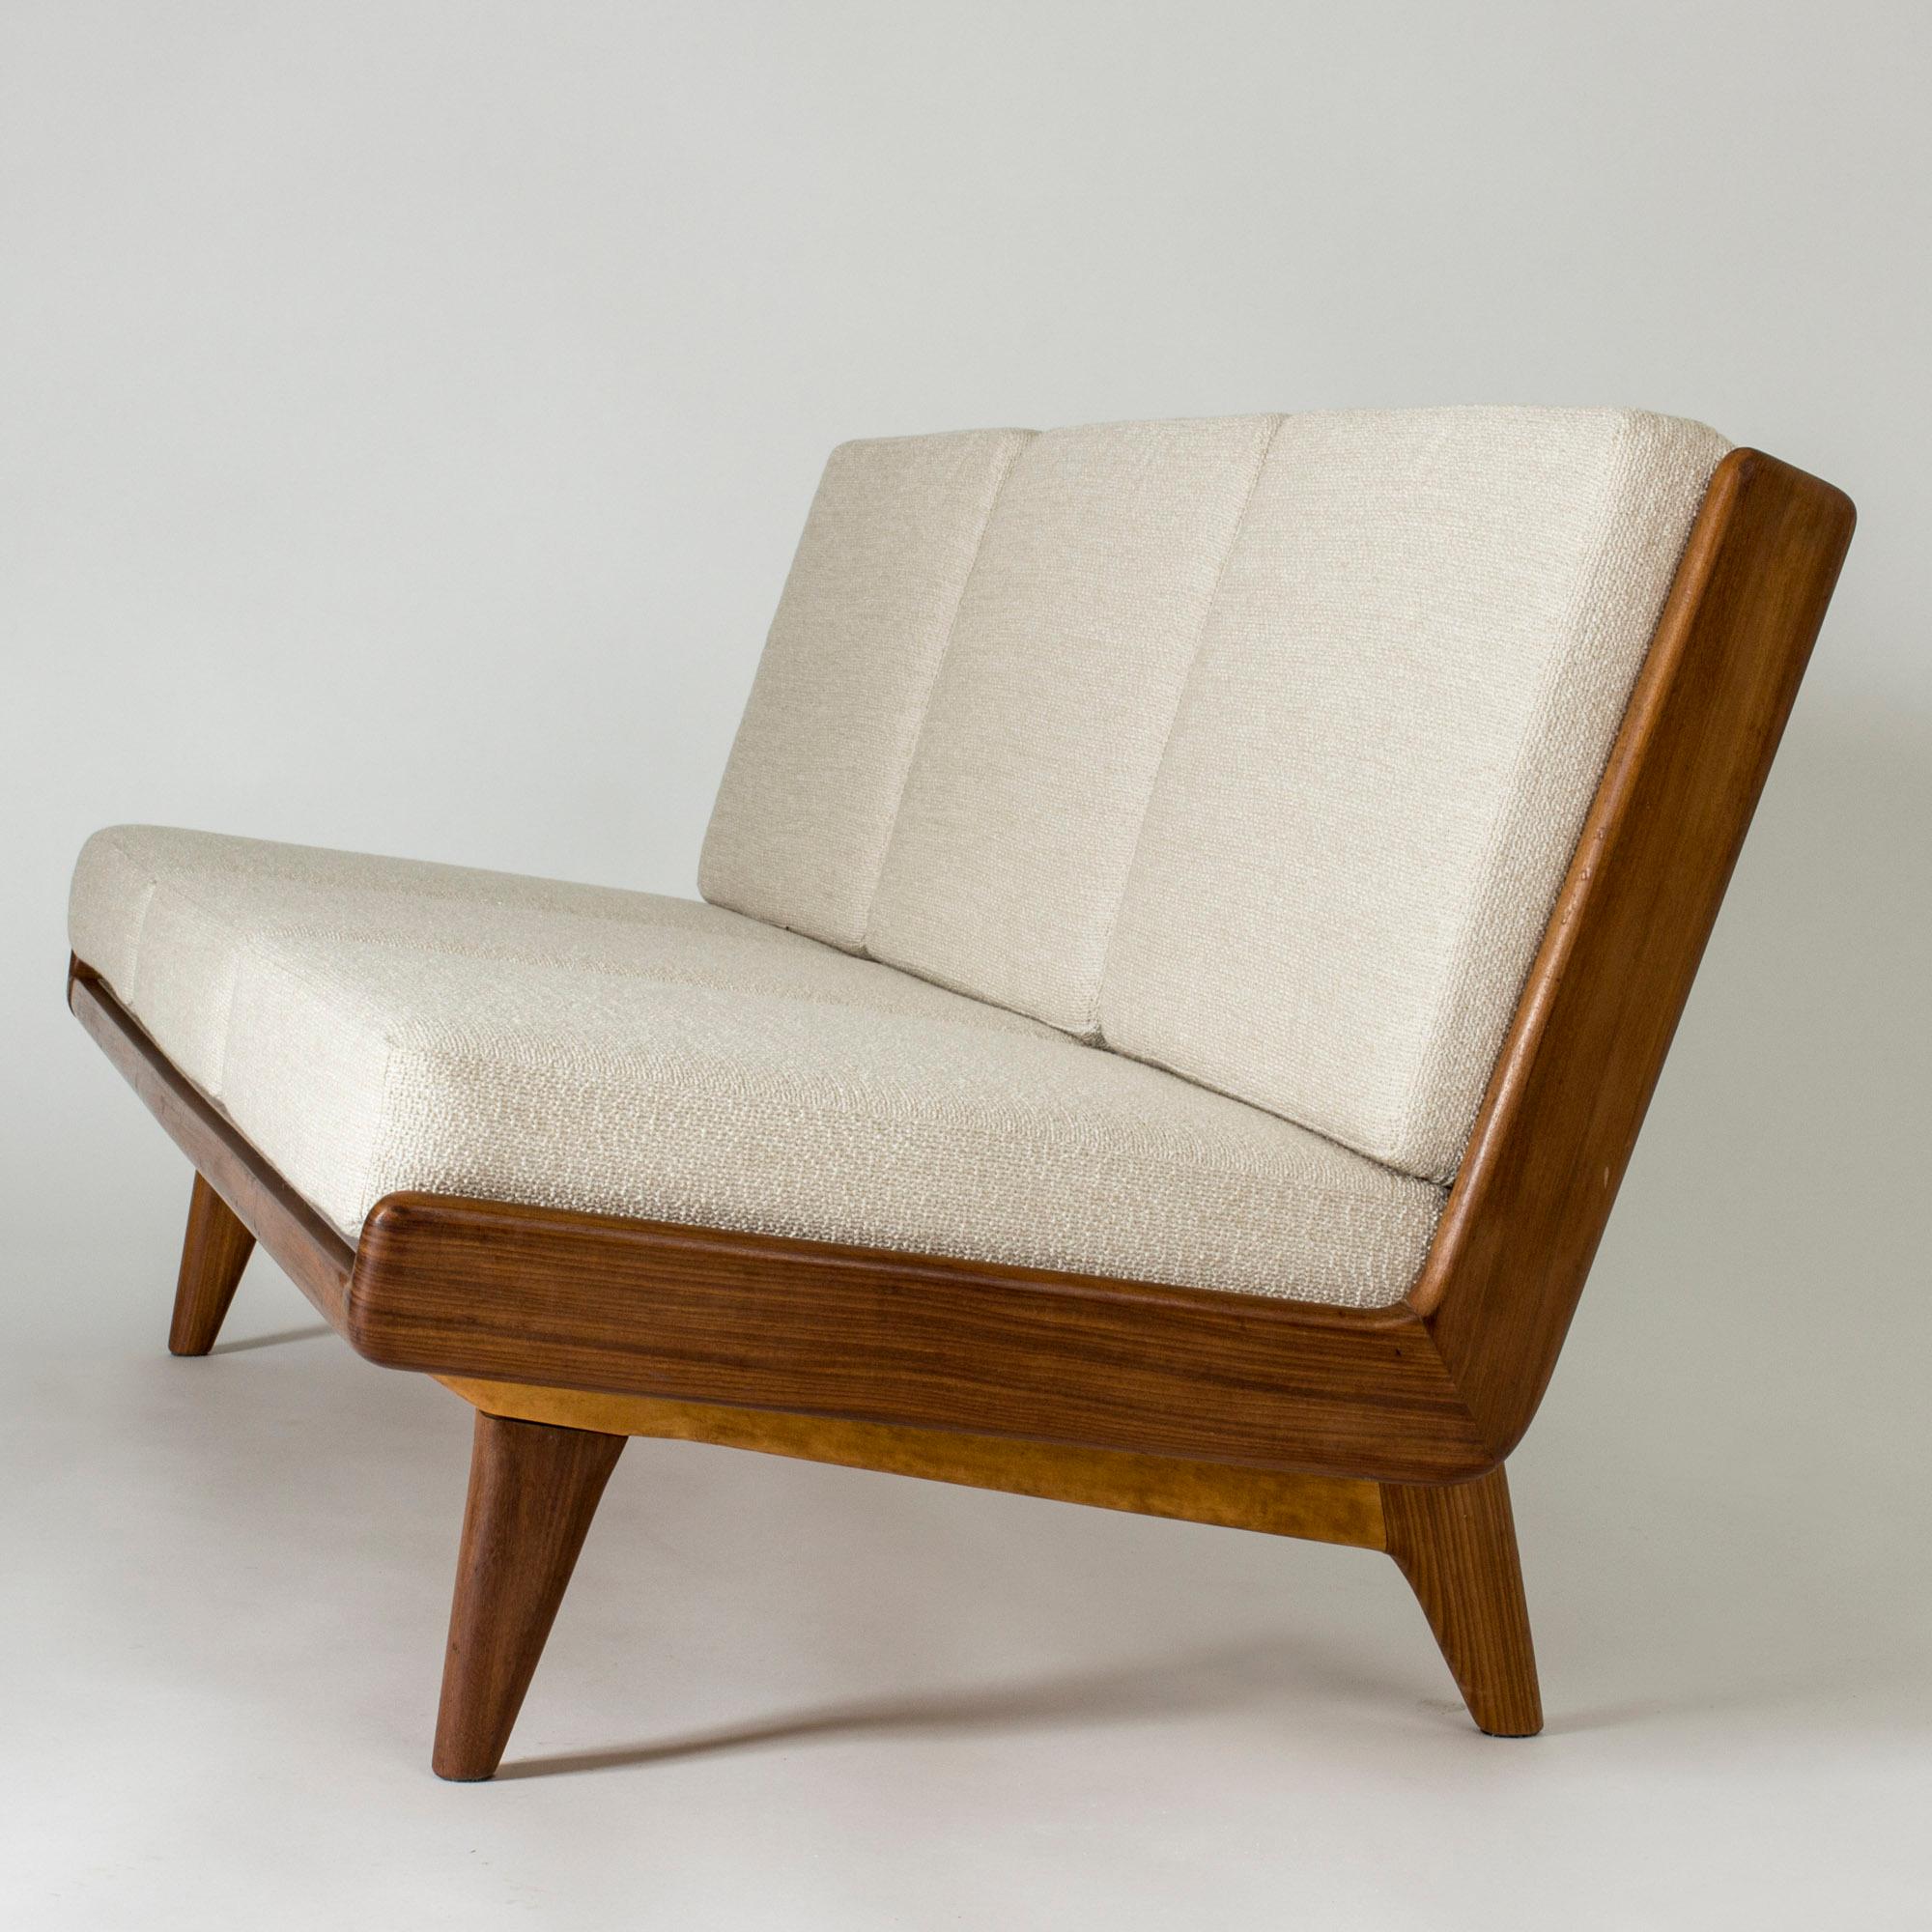 Mid-20th Century Walnut Sofa with Leather Webbing by Gustaf Hiort Af Ornäs, Finland, 1950s For Sale